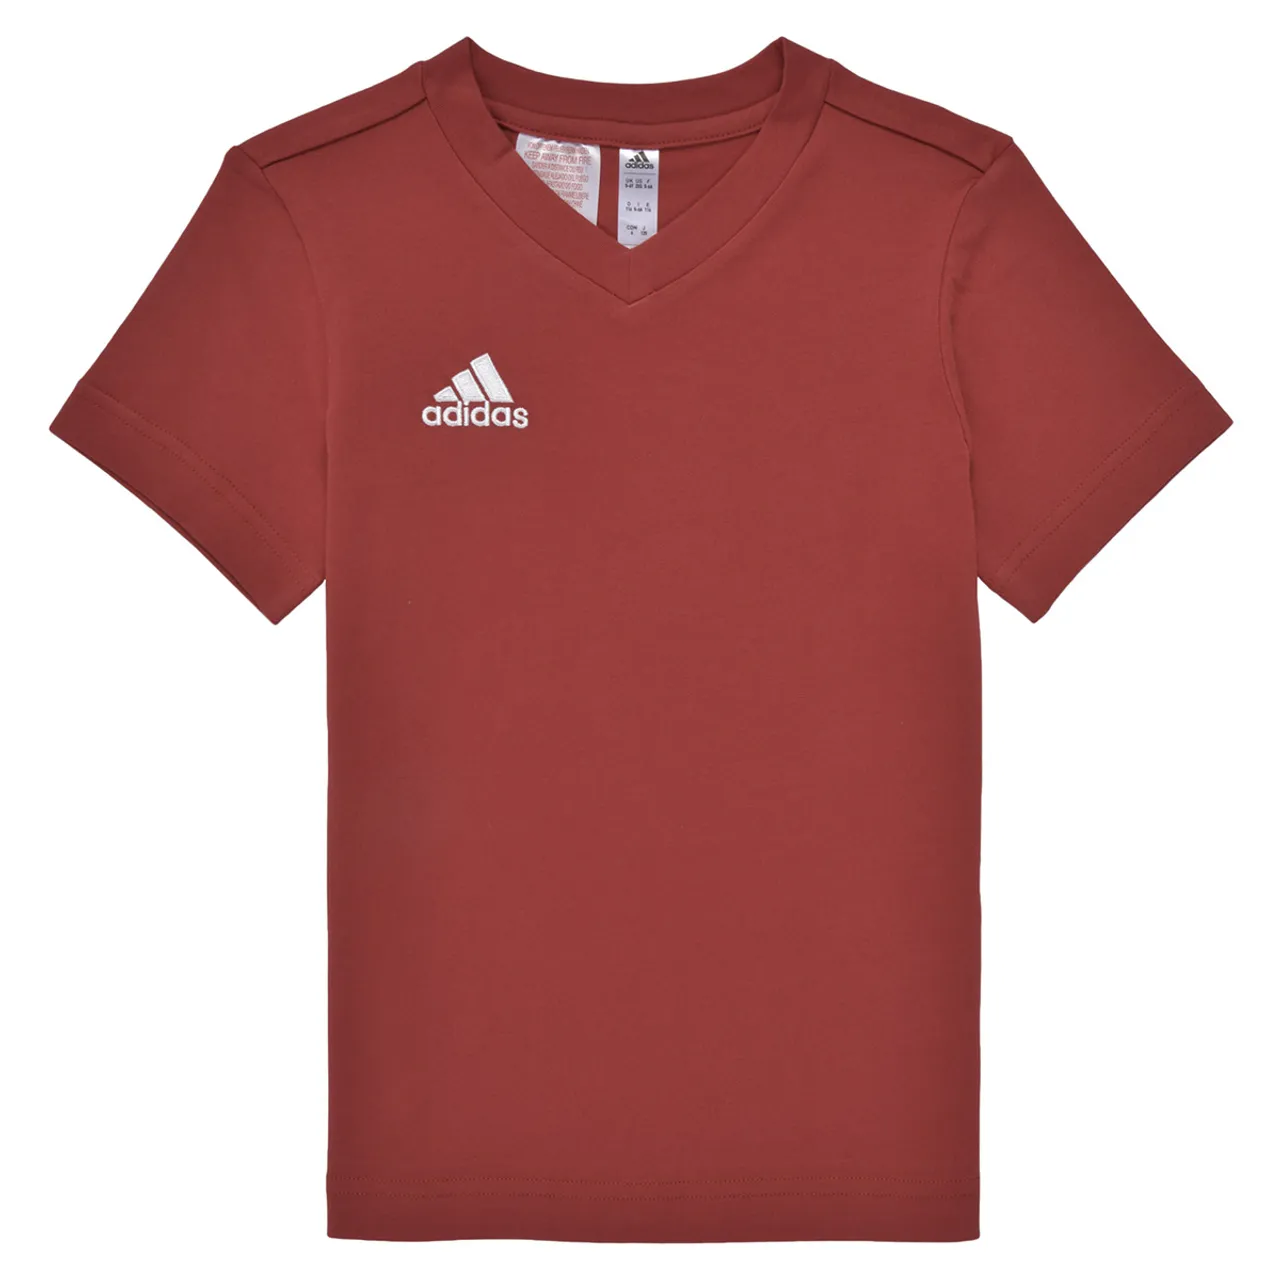 adidas  ENT22 TEE Y  boys's Children's T shirt in Red